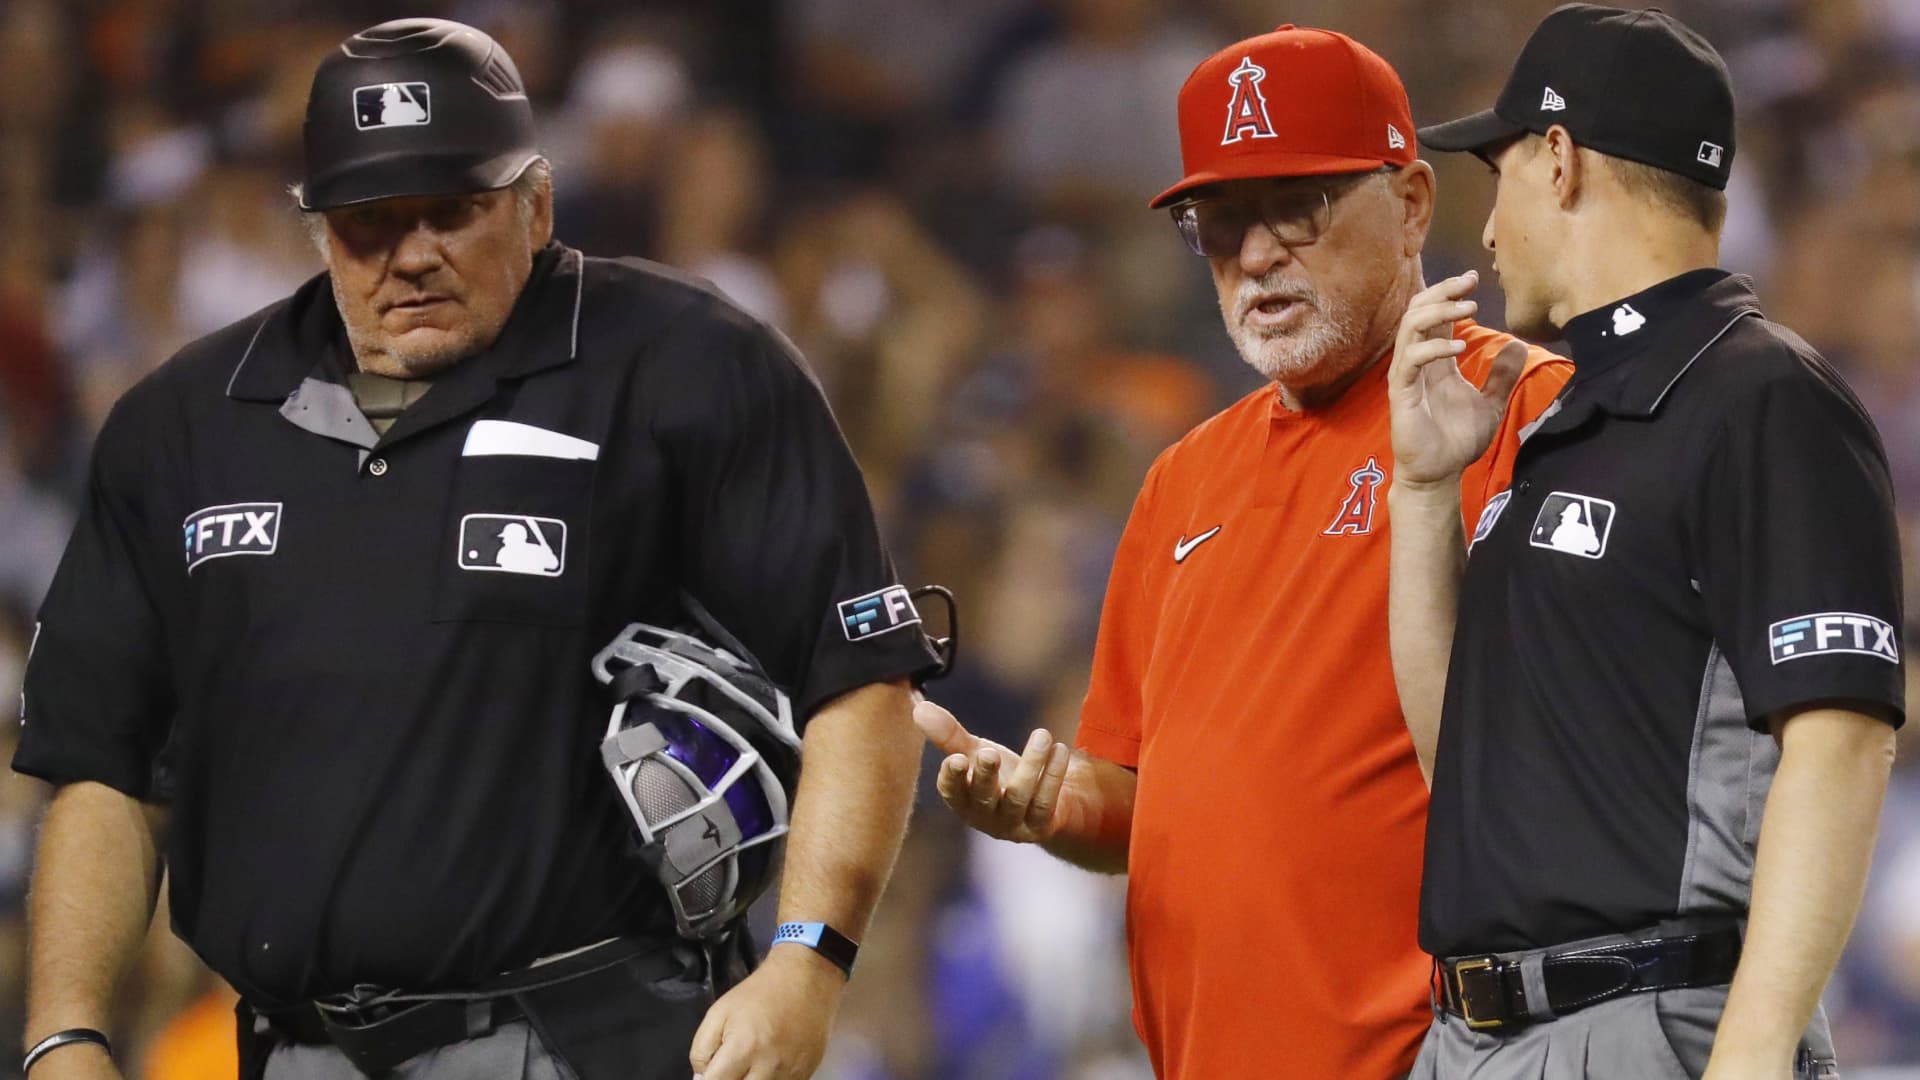 Los Angeles Angels Manager Joe Maddon #70 talks with the umpires about fan interference during the seventh inning of the game against the Detroit Tigers at Comerica Park on August 17, 2021 in Detroit, Michigan.